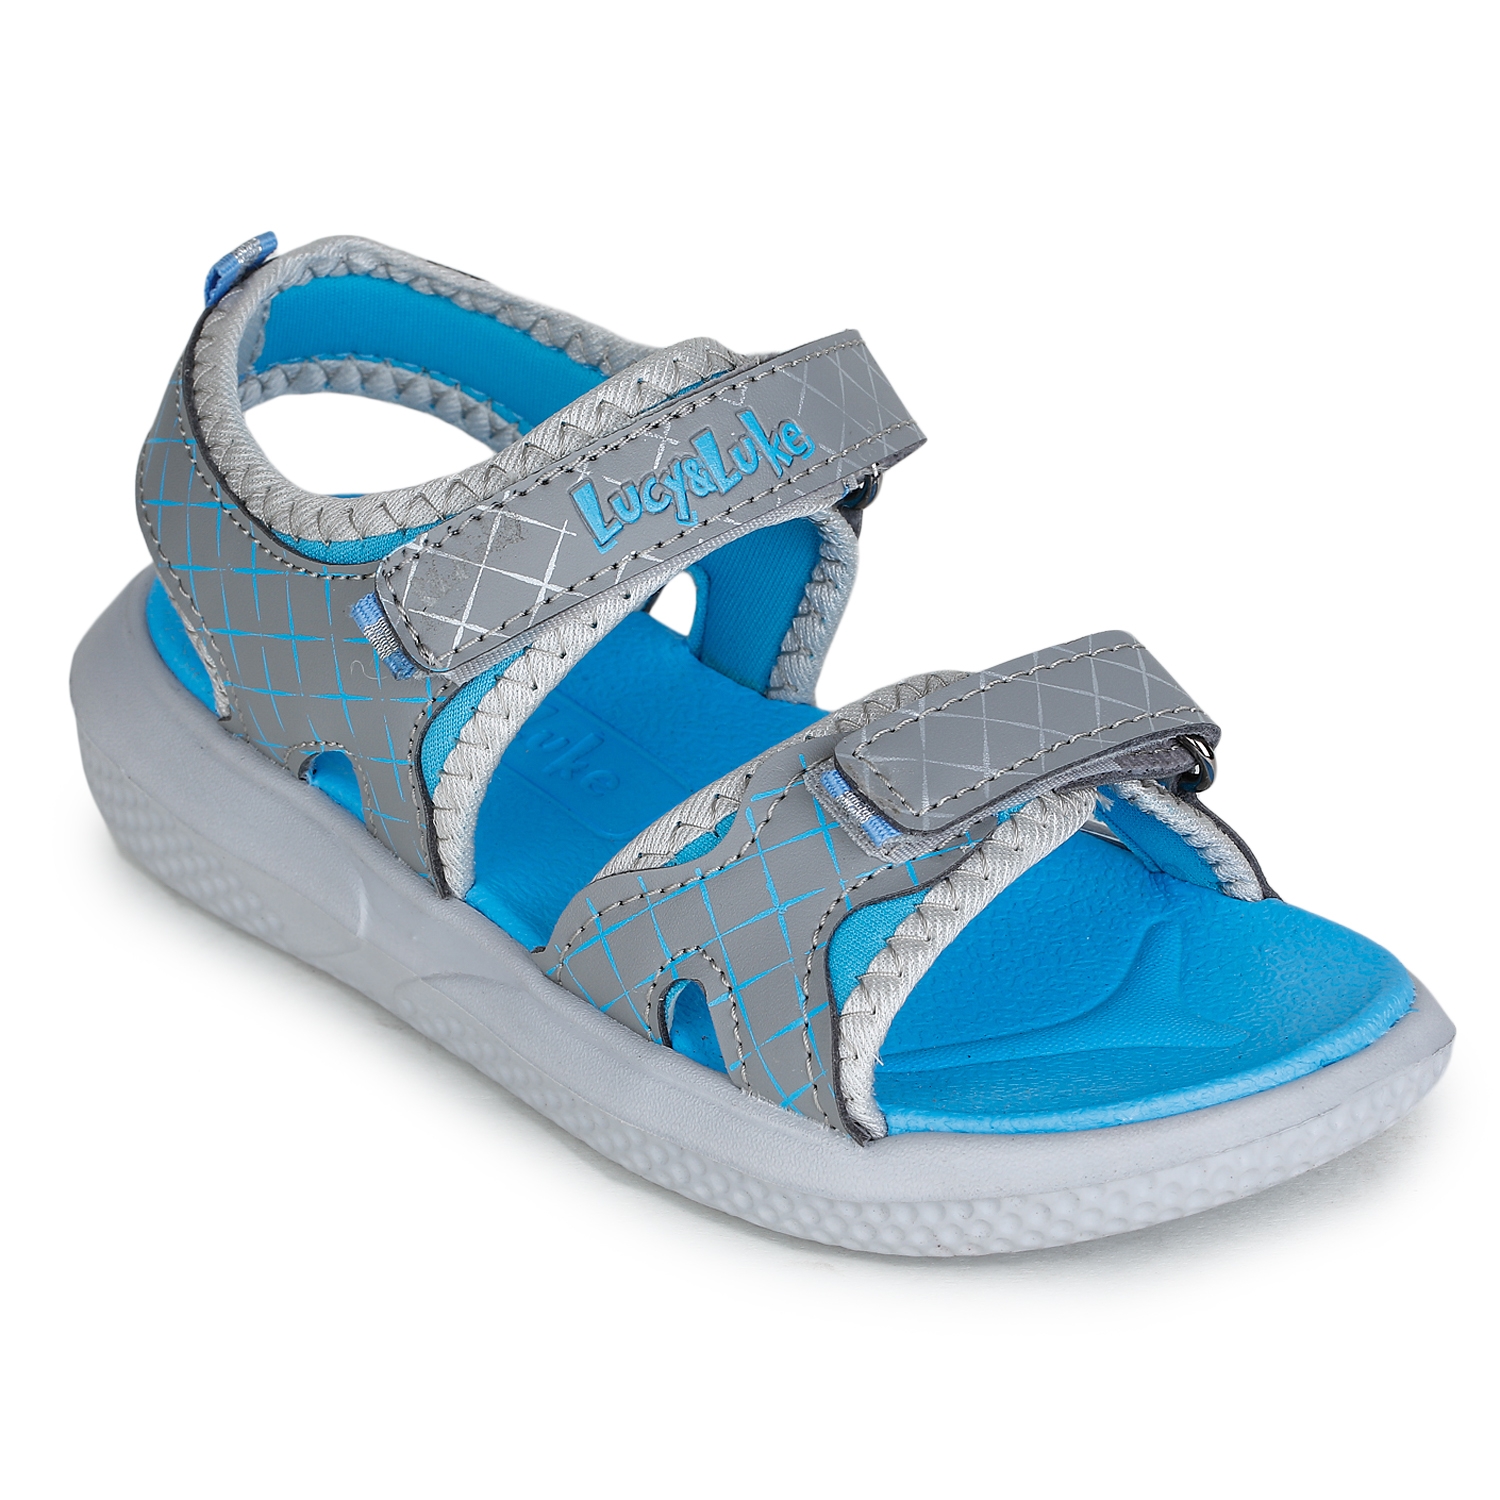 Lucy & Luke by Liberty HIPPO-4 Grey Sandals for Kids